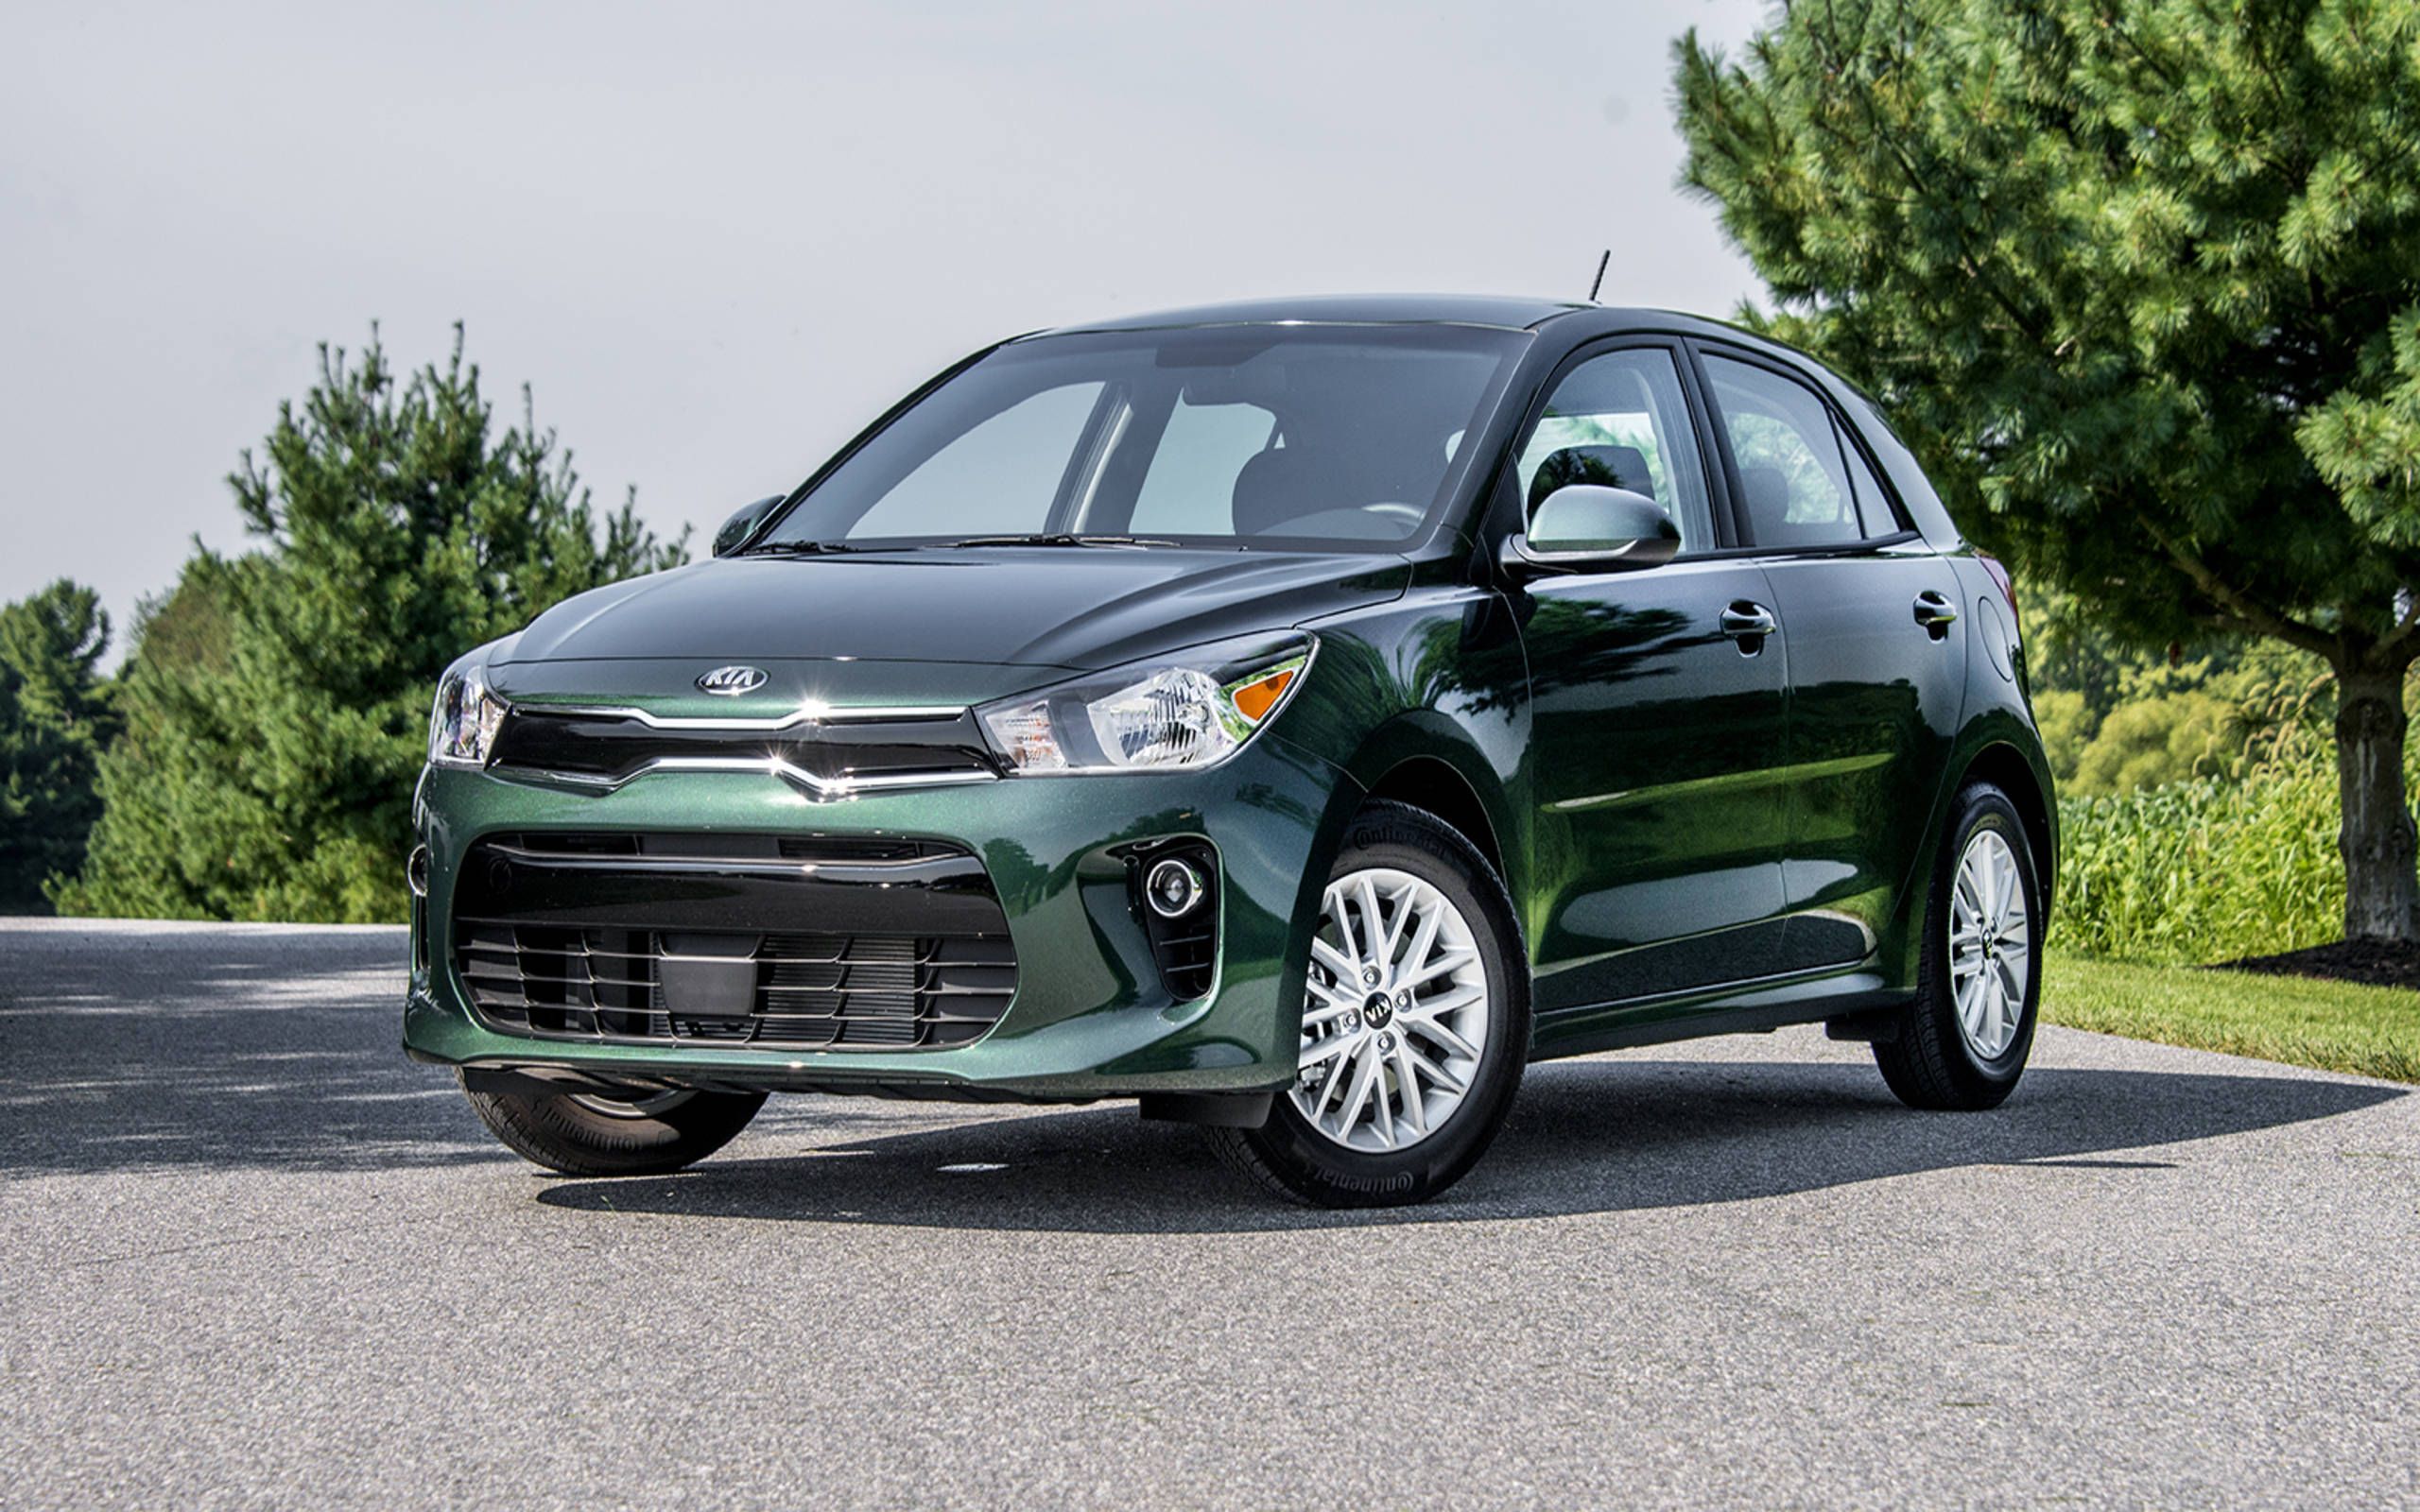 2018 Kia Rio: The Little Kia That Can, And Does